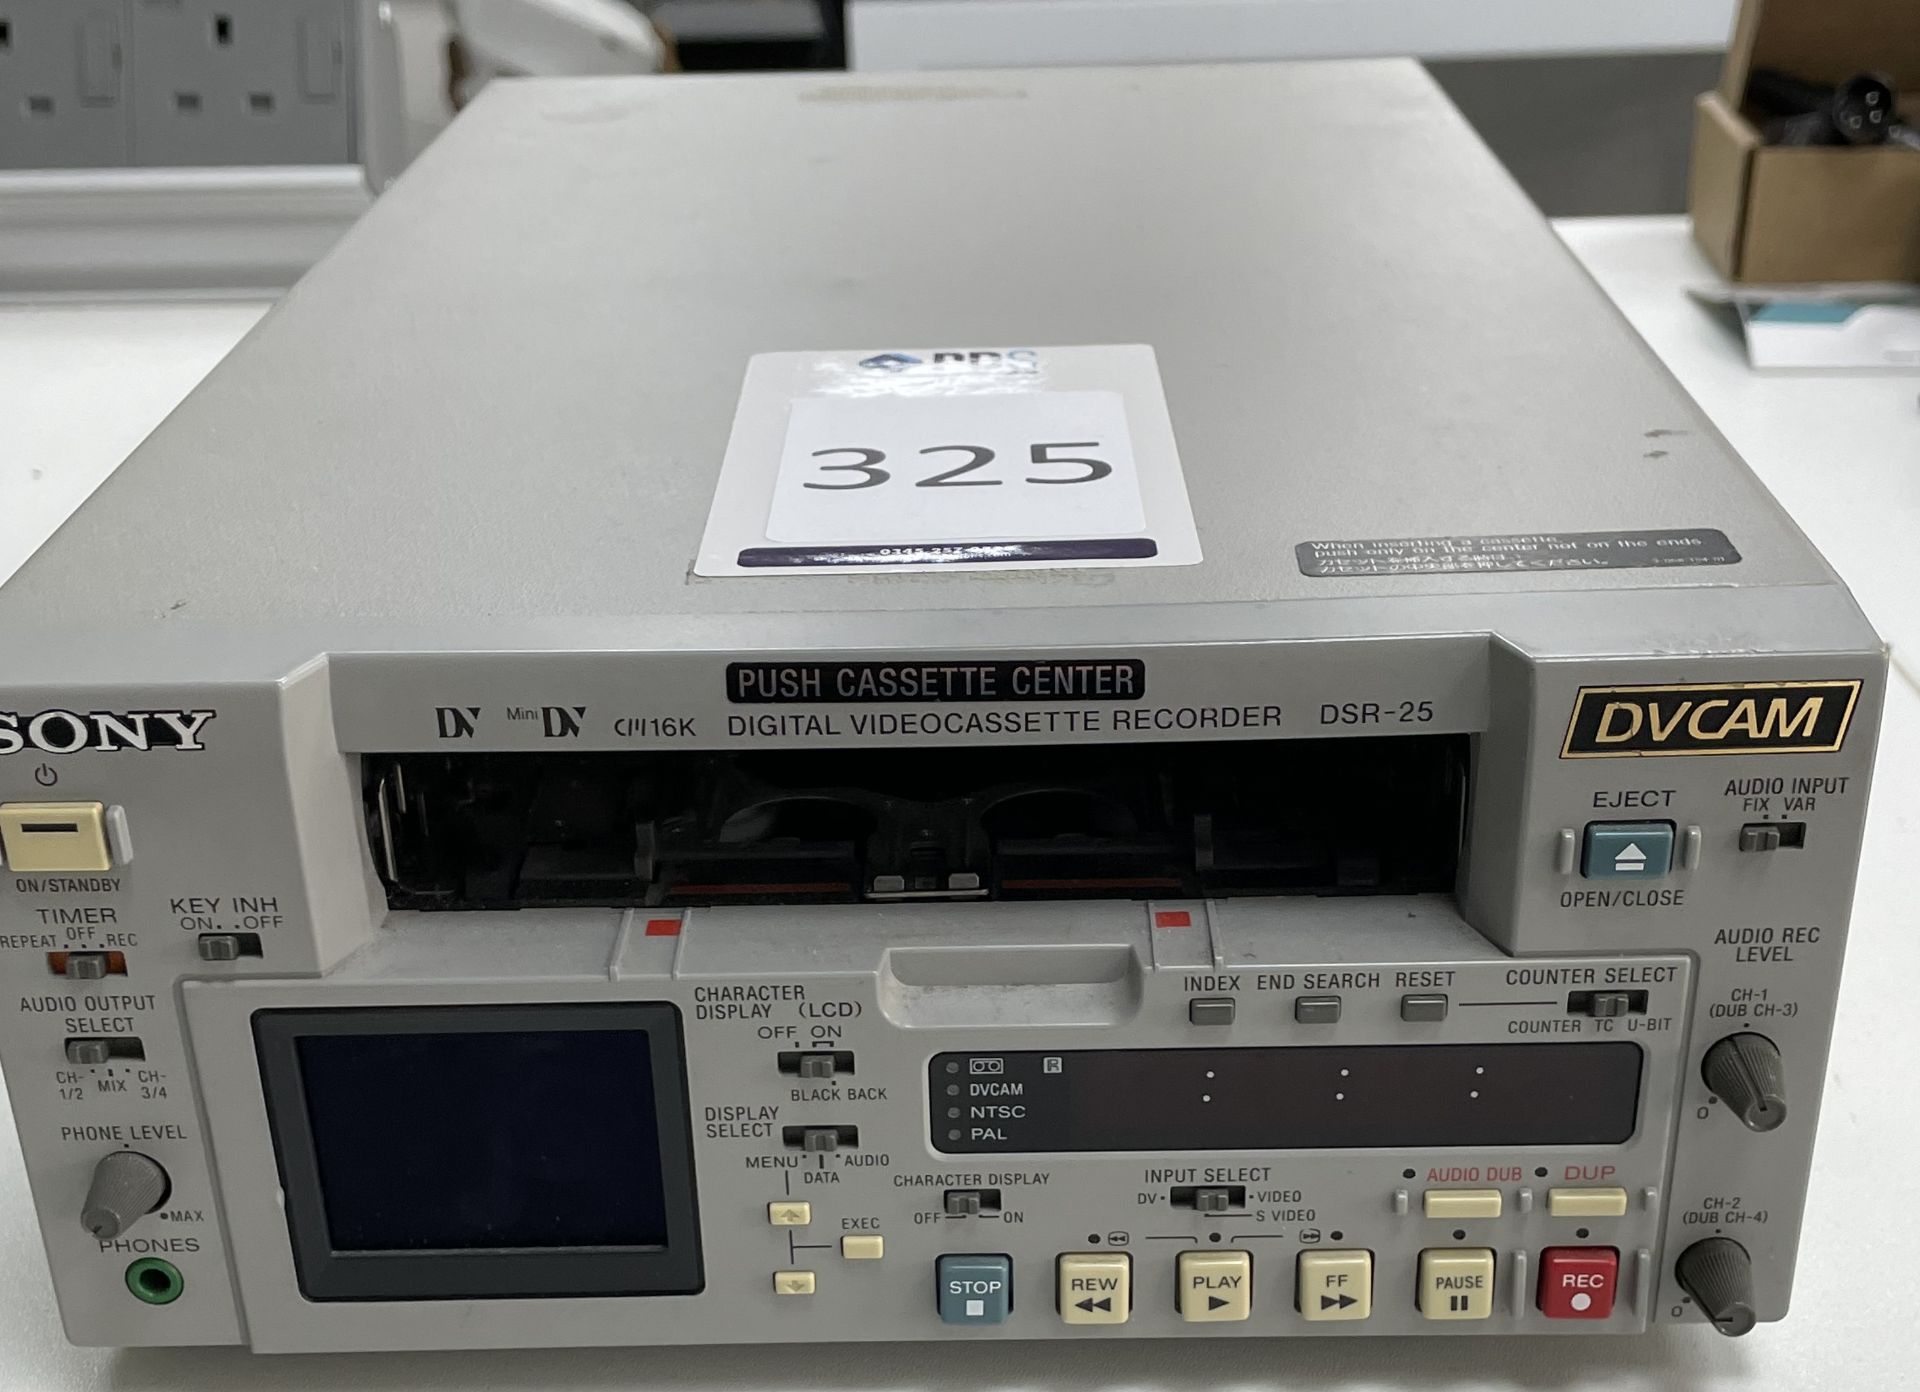 Sony DSR-25 DVCAM Recorder (Location: Westminster. Please Refer to General Notes)